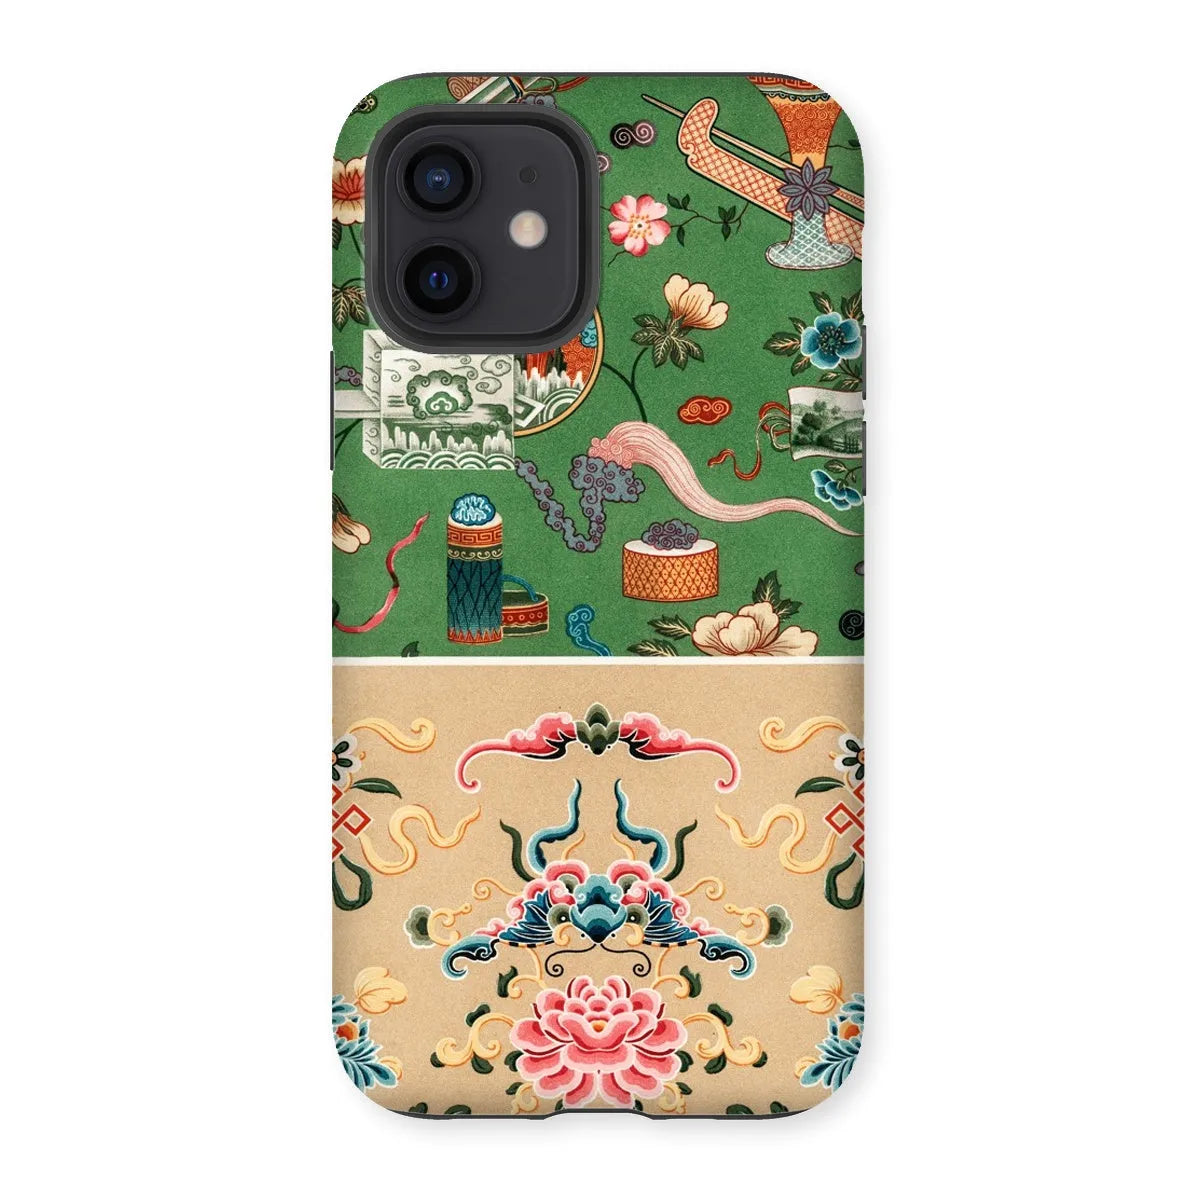 This Chinese Pattern By Auguste Racinet Tough Phone Case - Iphone 12 / Matte - Mobile Phone Cases - Aesthetic Art